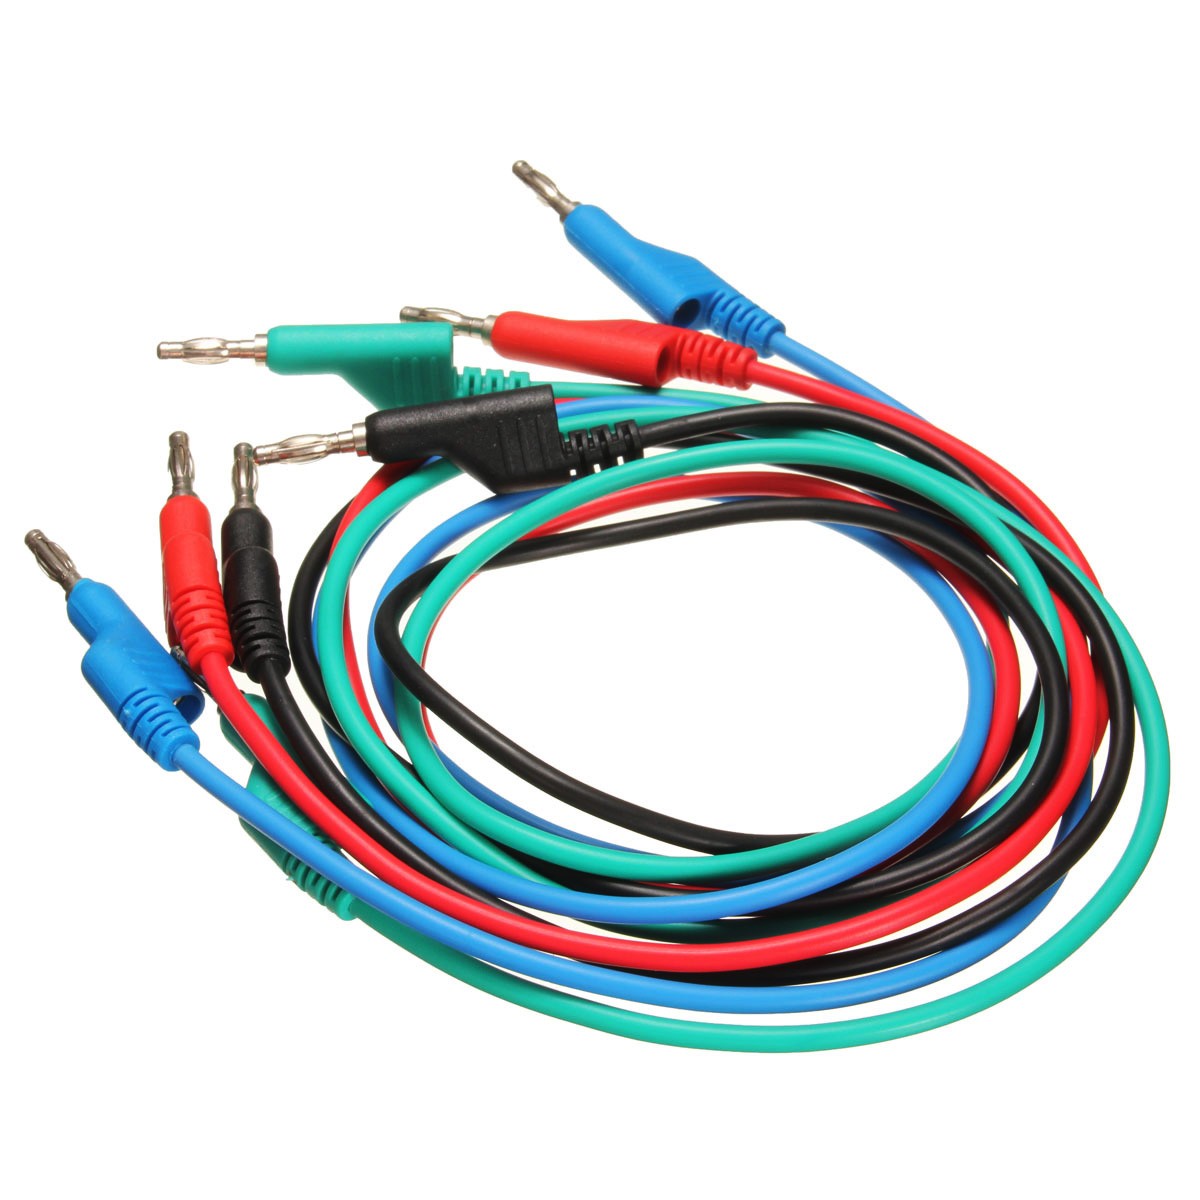 DANIU-4pcs-1M-4mm-Banana-to-Banana-Plug-Soft-Silicone-Test-Cable-Lead-for-Multimeter-4-Colors-1157595-3